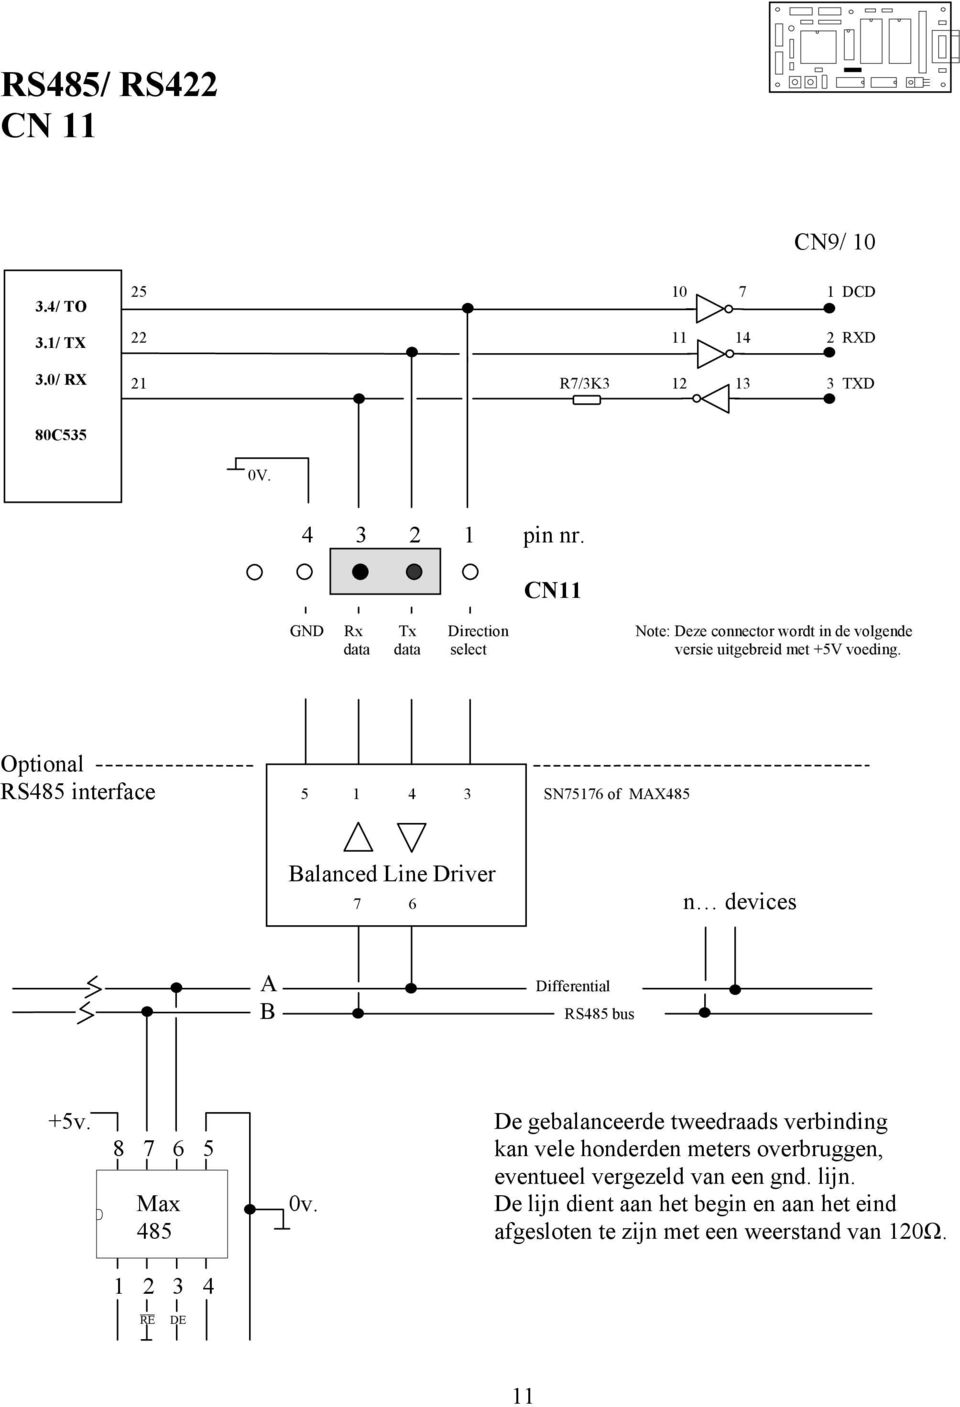 Optional RS485 interface 5 1 4 3 SN75176 of MAX485 Balanced Line Driver 7 6 n devices A Differential B RS485 bus +5v.